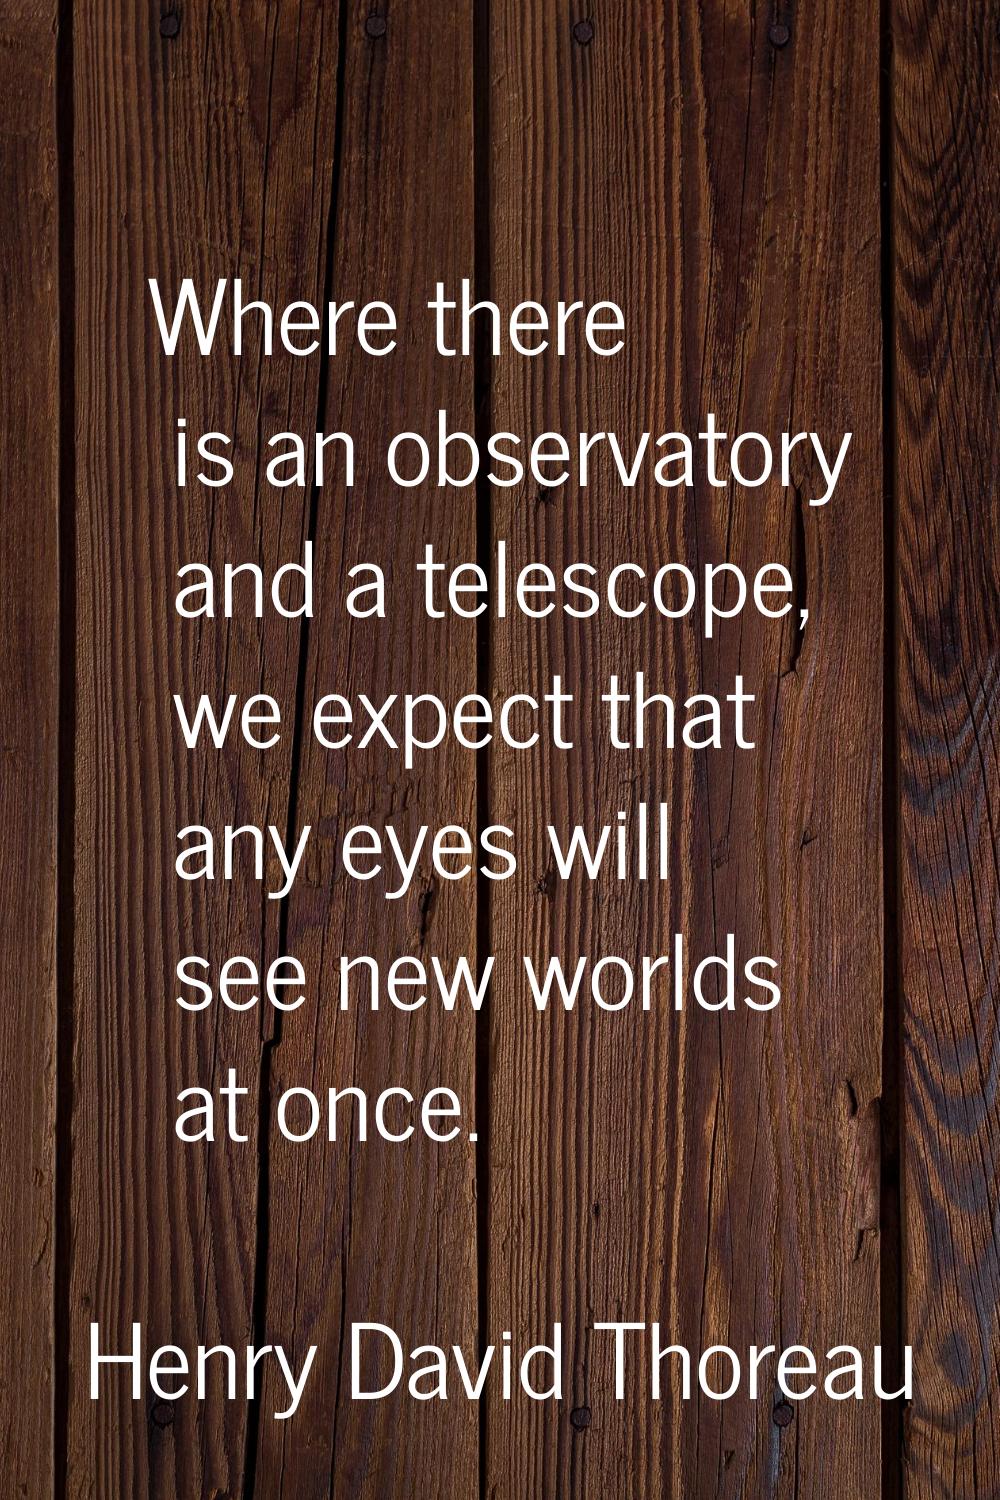 Where there is an observatory and a telescope, we expect that any eyes will see new worlds at once.